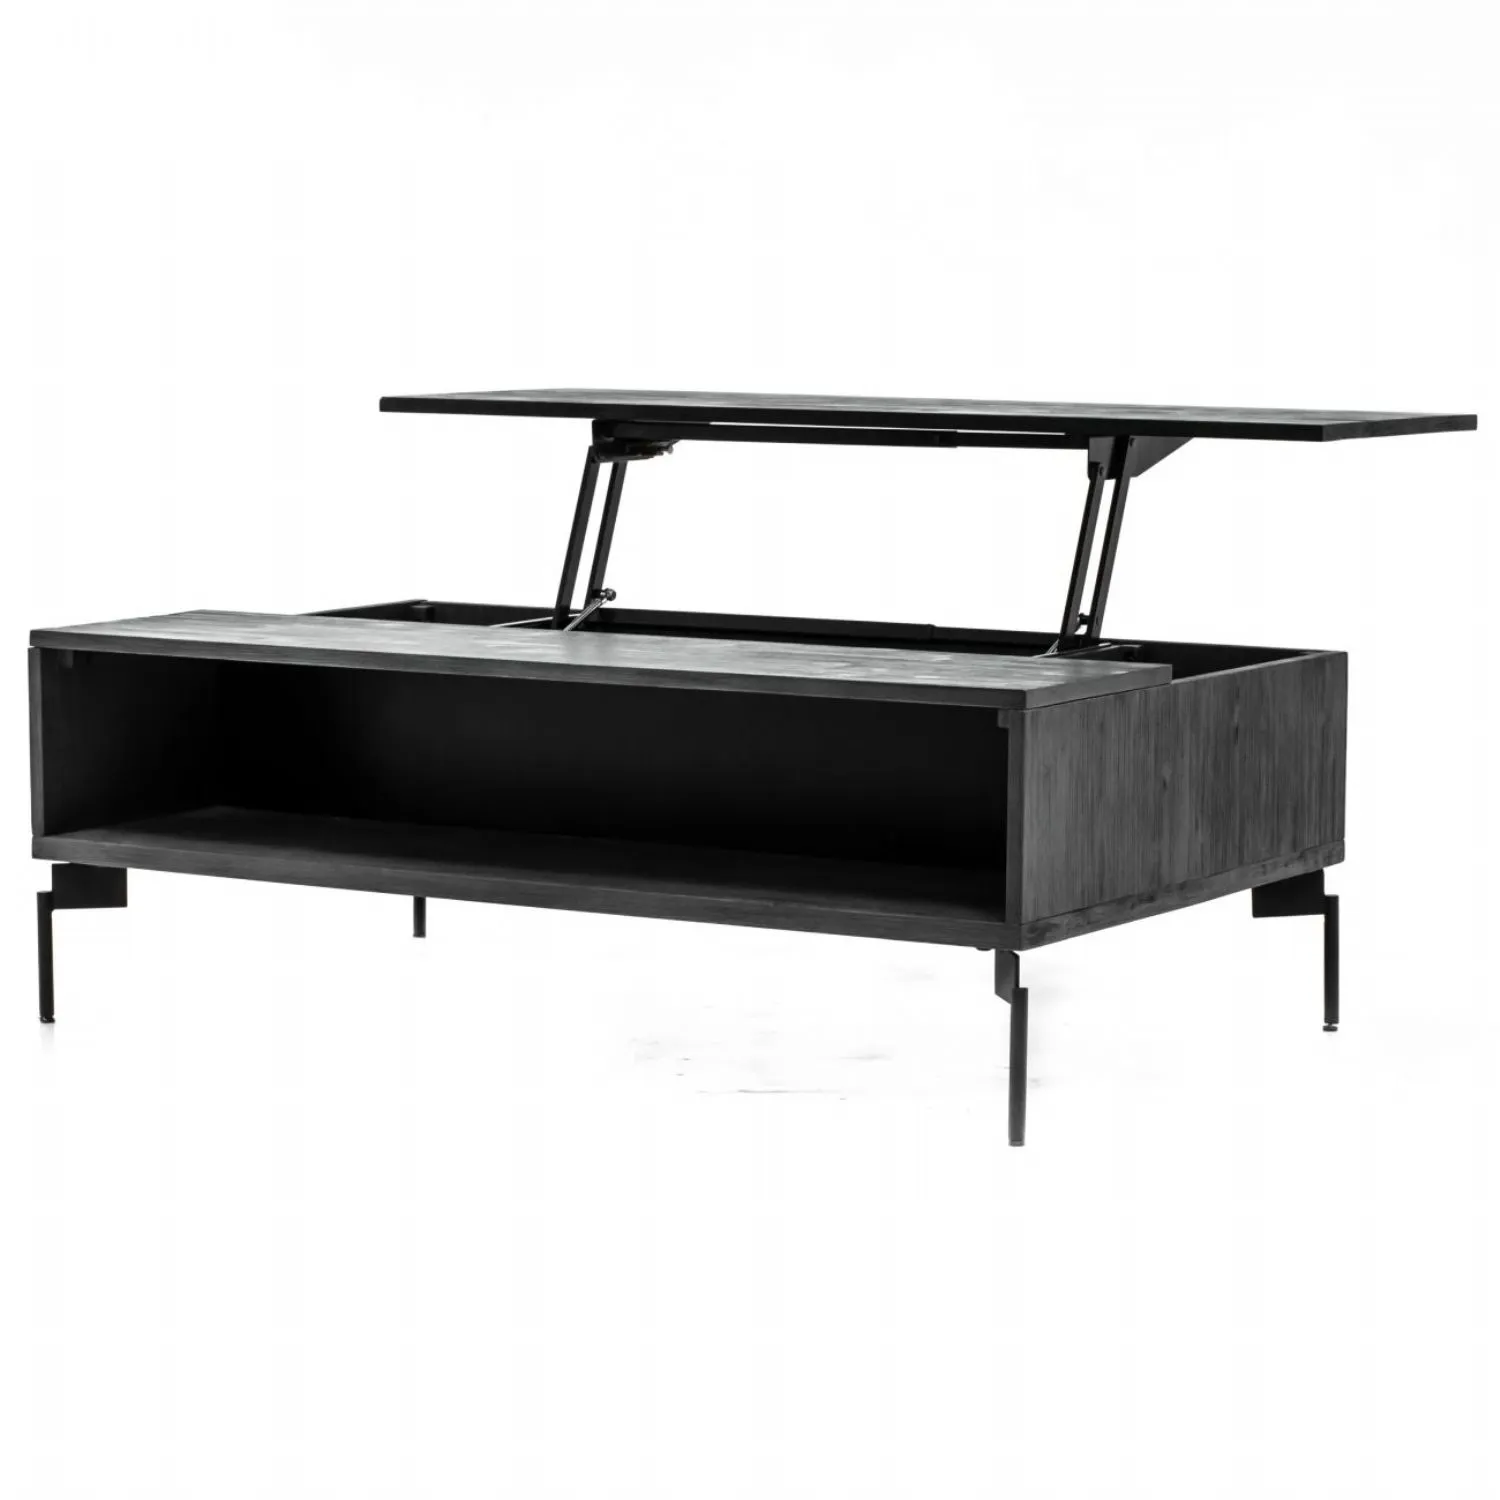 Bronks Black Acacia Coffee Table with Motion Top Mechanism